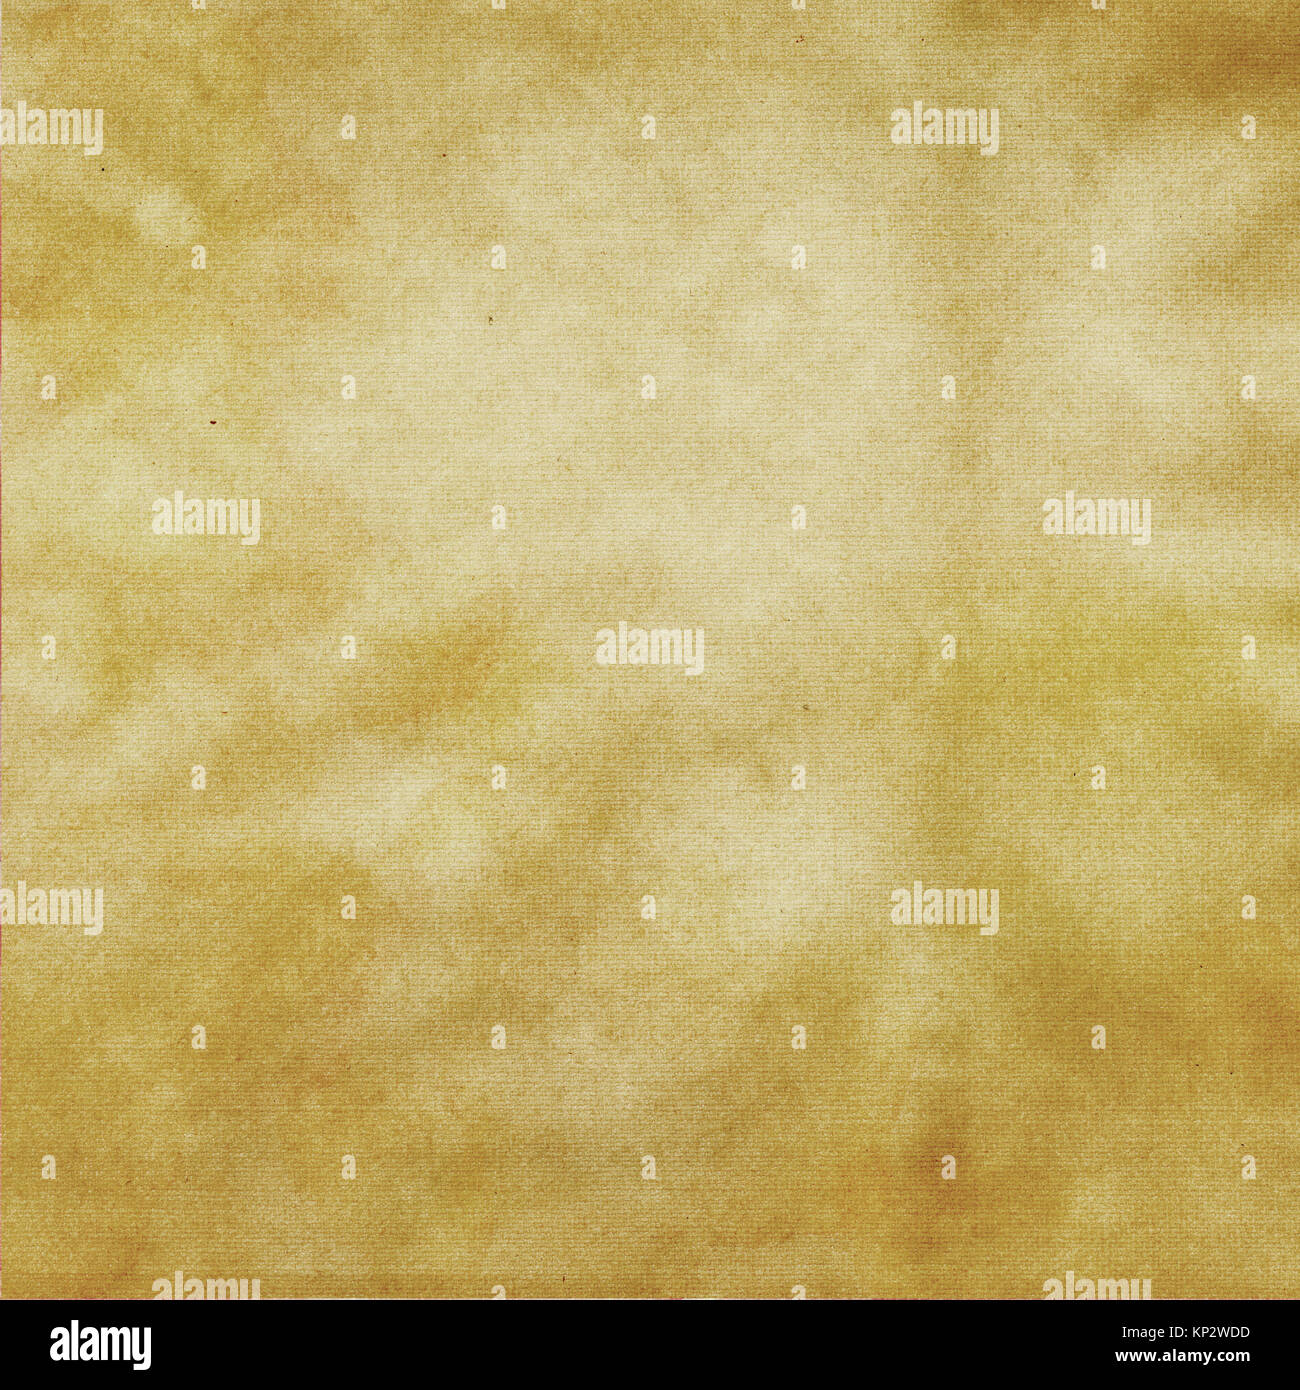 Linen material grunge texture.Natural linen material for the design. Stock Photo